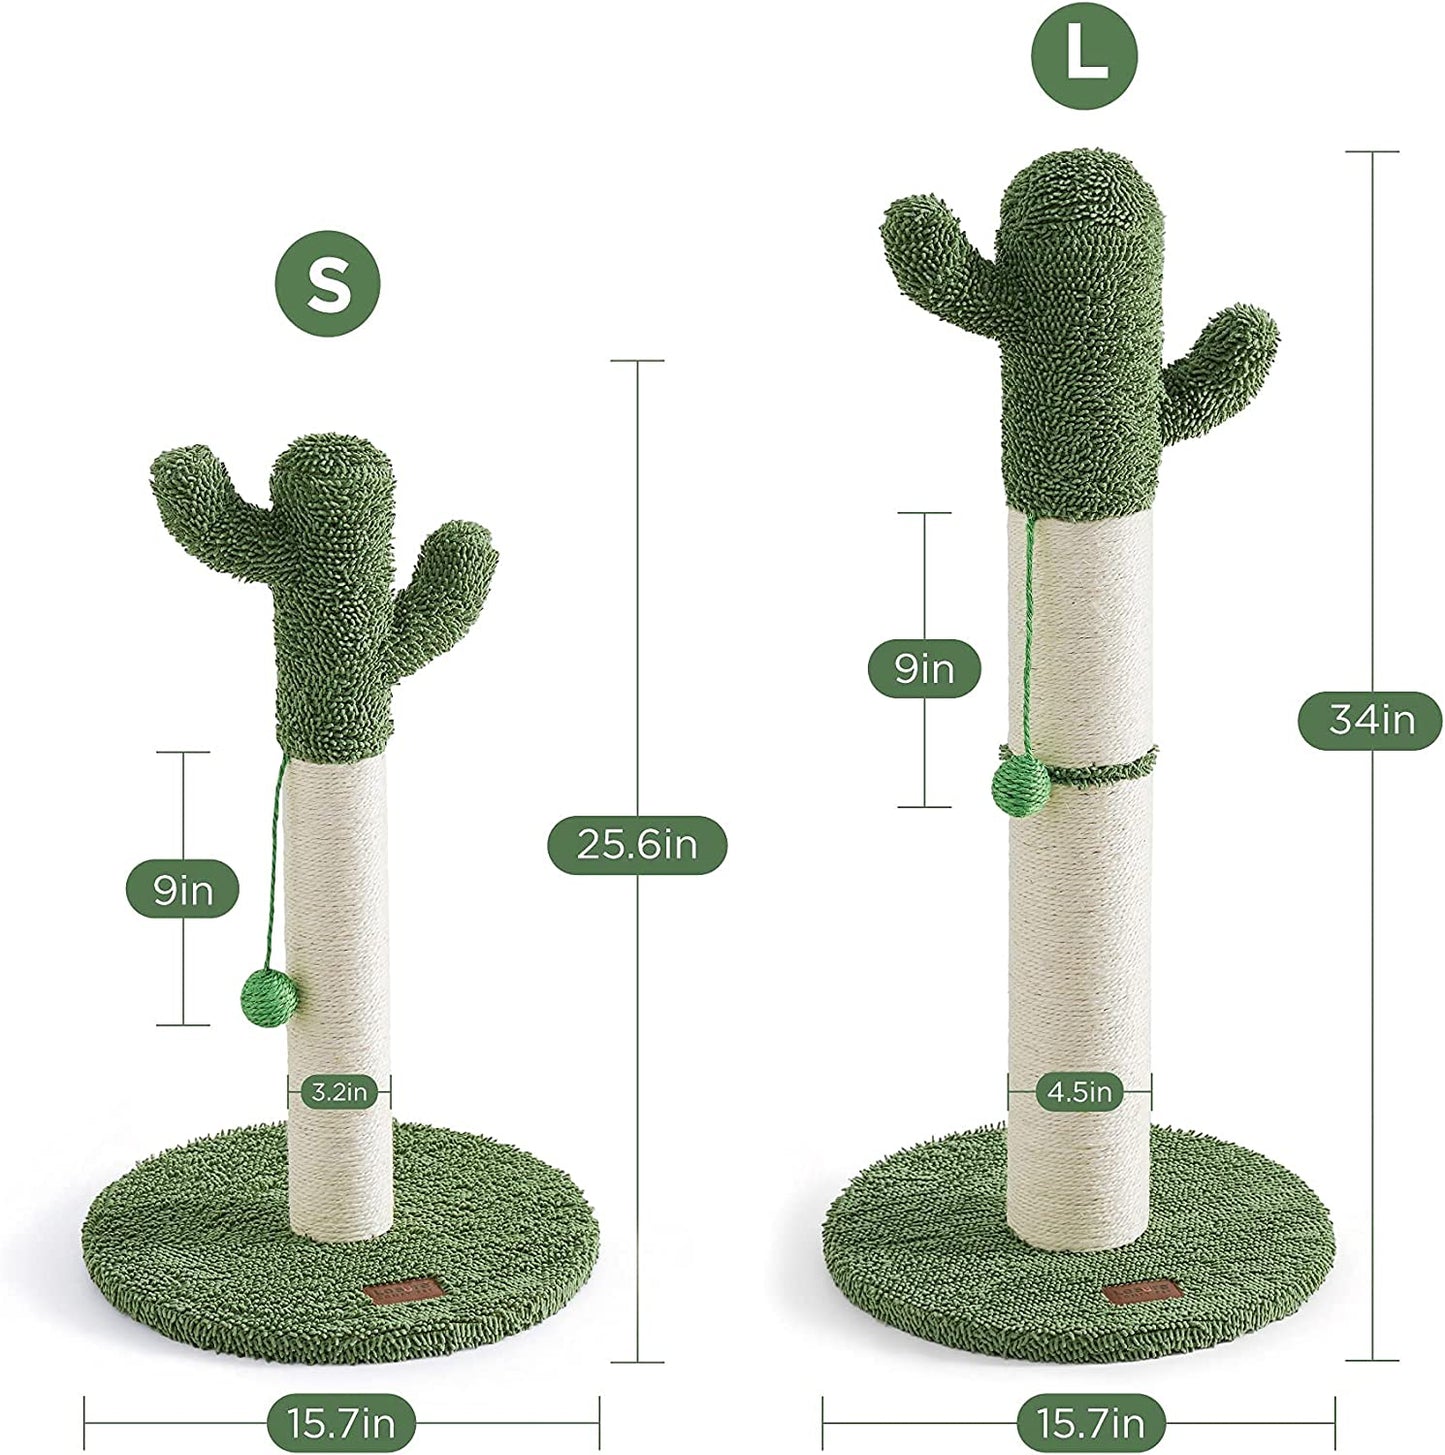 Cactus Sisal Rope Cat Scratcher with Hanging Ball for Cats and Kittens